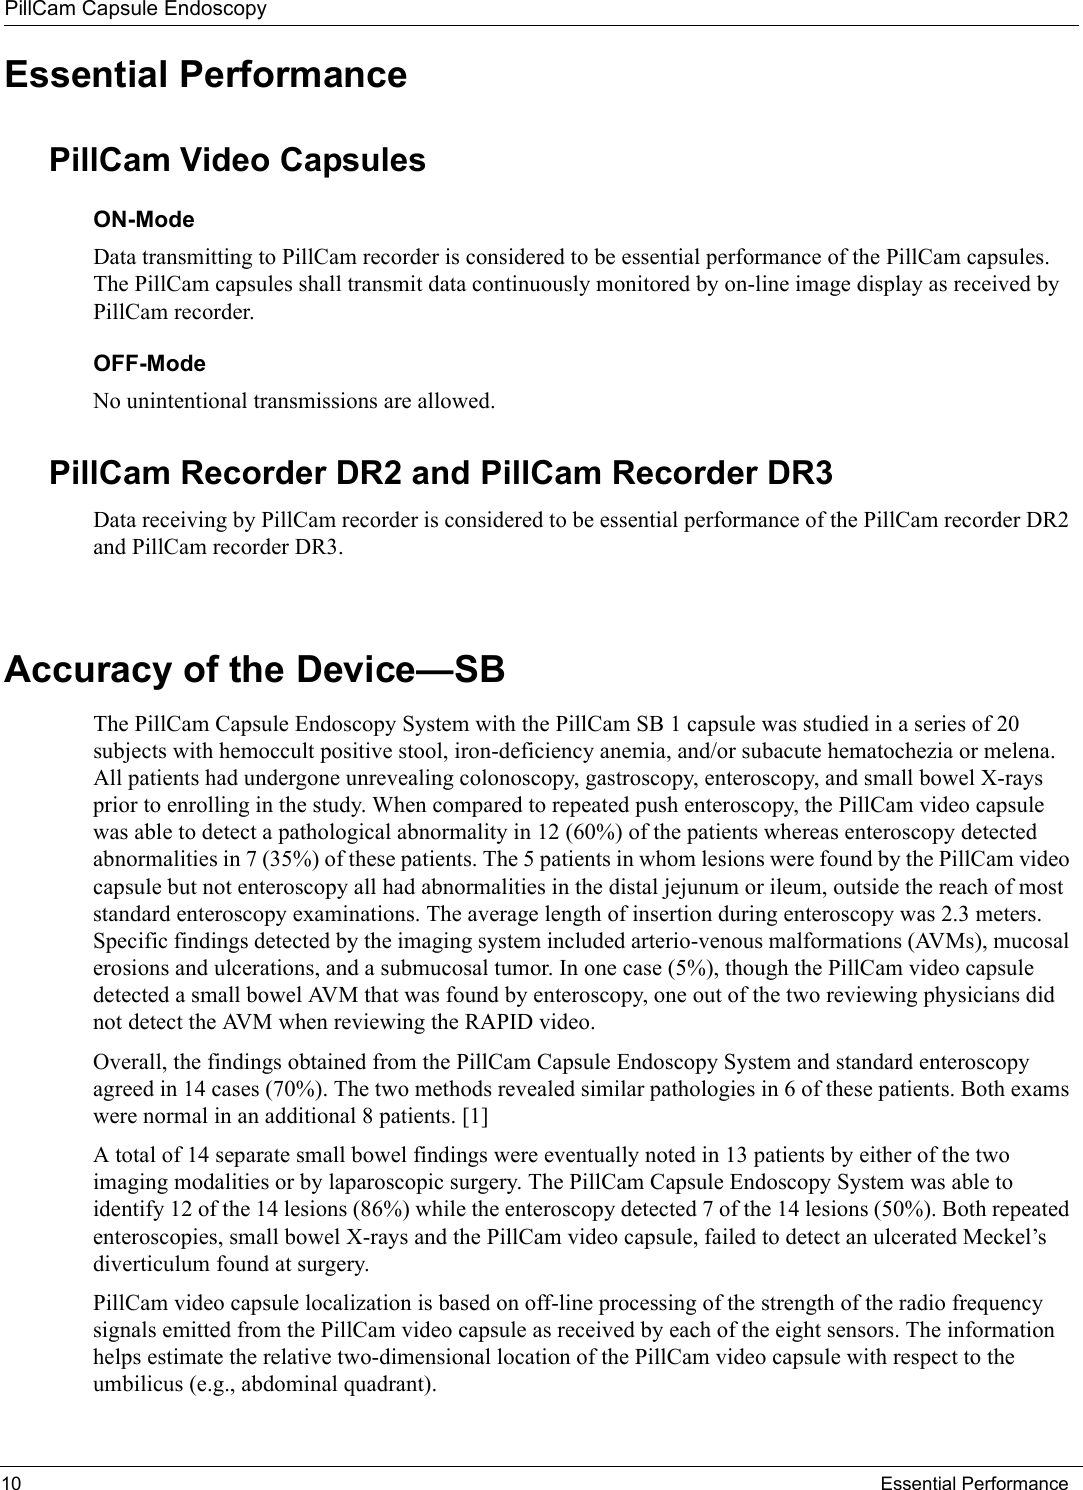 PillCam Capsule Endoscopy10 Essential PerformanceEssential PerformancePillCam Video Capsules ON-ModeData transmitting to PillCam recorder is considered to be essential performance of the PillCam capsules. The PillCam capsules shall transmit data continuously monitored by on-line image display as received by PillCam recorder.OFF-ModeNo unintentional transmissions are allowed.PillCam Recorder DR2 and PillCam Recorder DR3Data receiving by PillCam recorder is considered to be essential performance of the PillCam recorder DR2 and PillCam recorder DR3.Accuracy of the Device—SB The PillCam Capsule Endoscopy System with the PillCam SB 1 capsule was studied in a series of 20 subjects with hemoccult positive stool, iron-deficiency anemia, and/or subacute hematochezia or melena. All patients had undergone unrevealing colonoscopy, gastroscopy, enteroscopy, and small bowel X-rays prior to enrolling in the study. When compared to repeated push enteroscopy, the PillCam video capsule was able to detect a pathological abnormality in 12 (60%) of the patients whereas enteroscopy detected abnormalities in 7 (35%) of these patients. The 5 patients in whom lesions were found by the PillCam video capsule but not enteroscopy all had abnormalities in the distal jejunum or ileum, outside the reach of most standard enteroscopy examinations. The average length of insertion during enteroscopy was 2.3 meters. Specific findings detected by the imaging system included arterio-venous malformations (AVMs), mucosal erosions and ulcerations, and a submucosal tumor. In one case (5%), though the PillCam video capsule detected a small bowel AVM that was found by enteroscopy, one out of the two reviewing physicians did not detect the AVM when reviewing the RAPID video.Overall, the findings obtained from the PillCam Capsule Endoscopy System and standard enteroscopy agreed in 14 cases (70%). The two methods revealed similar pathologies in 6 of these patients. Both exams were normal in an additional 8 patients. [1]A total of 14 separate small bowel findings were eventually noted in 13 patients by either of the two imaging modalities or by laparoscopic surgery. The PillCam Capsule Endoscopy System was able to identify 12 of the 14 lesions (86%) while the enteroscopy detected 7 of the 14 lesions (50%). Both repeated enteroscopies, small bowel X-rays and the PillCam video capsule, failed to detect an ulcerated Meckel’s diverticulum found at surgery.PillCam video capsule localization is based on off-line processing of the strength of the radio frequency signals emitted from the PillCam video capsule as received by each of the eight sensors. The information helps estimate the relative two-dimensional location of the PillCam video capsule with respect to the umbilicus (e.g., abdominal quadrant). 